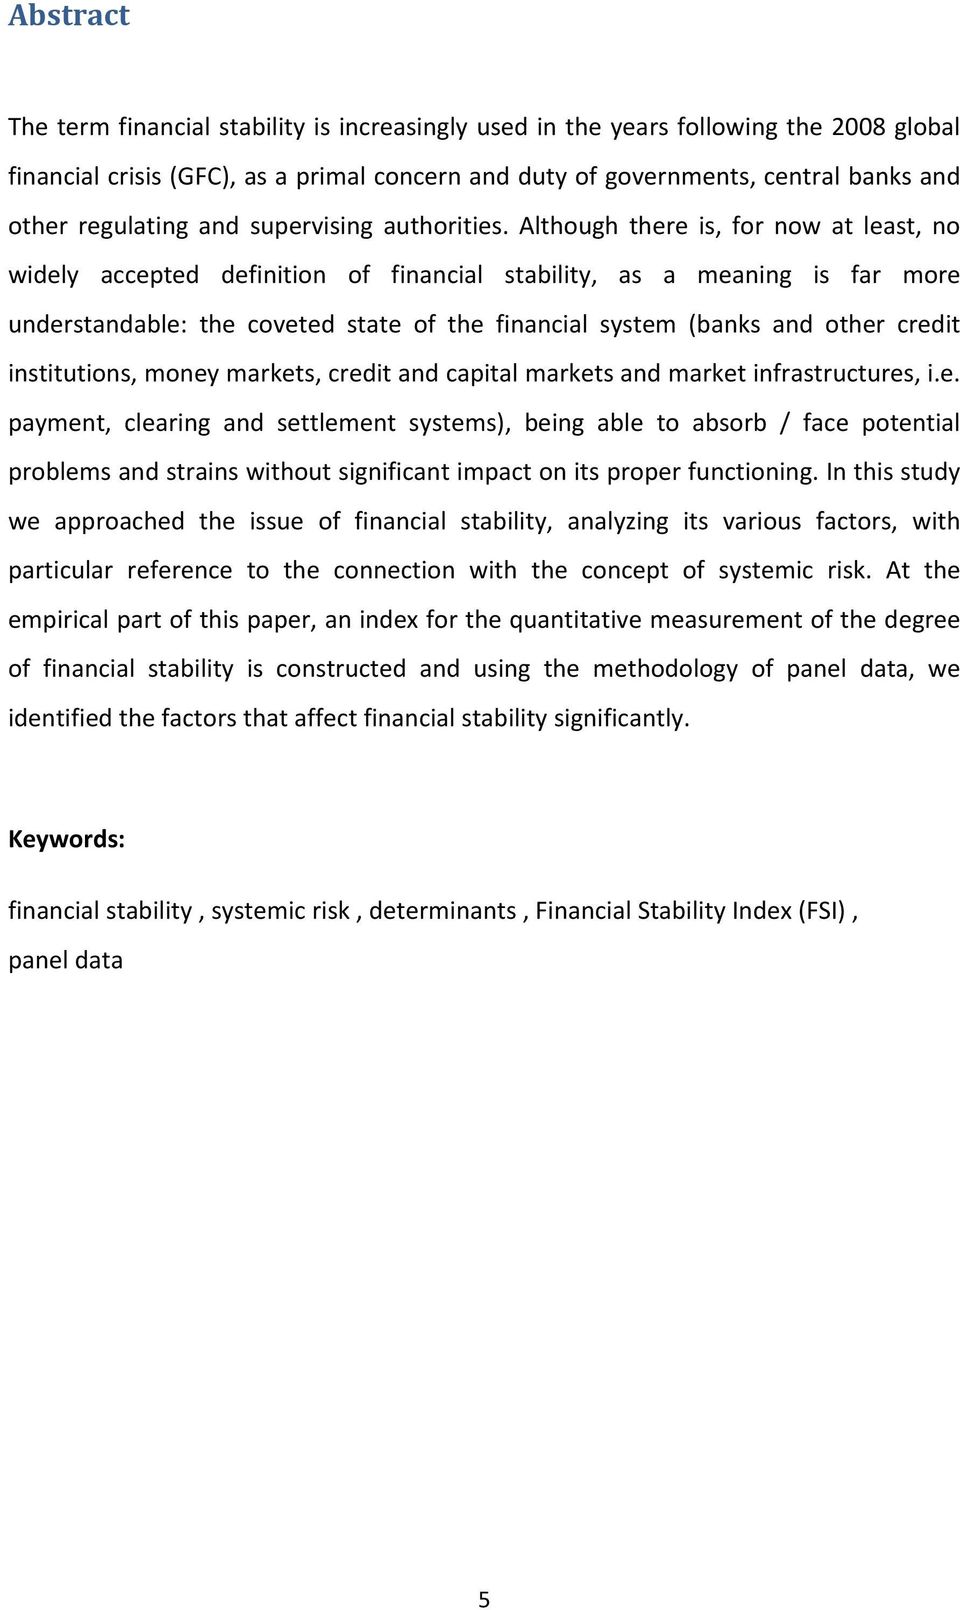 Although there is, for now at least, no widely accepted definition of financial stability, as a meaning is far more understandable: the coveted state of the financial system (banks and other credit